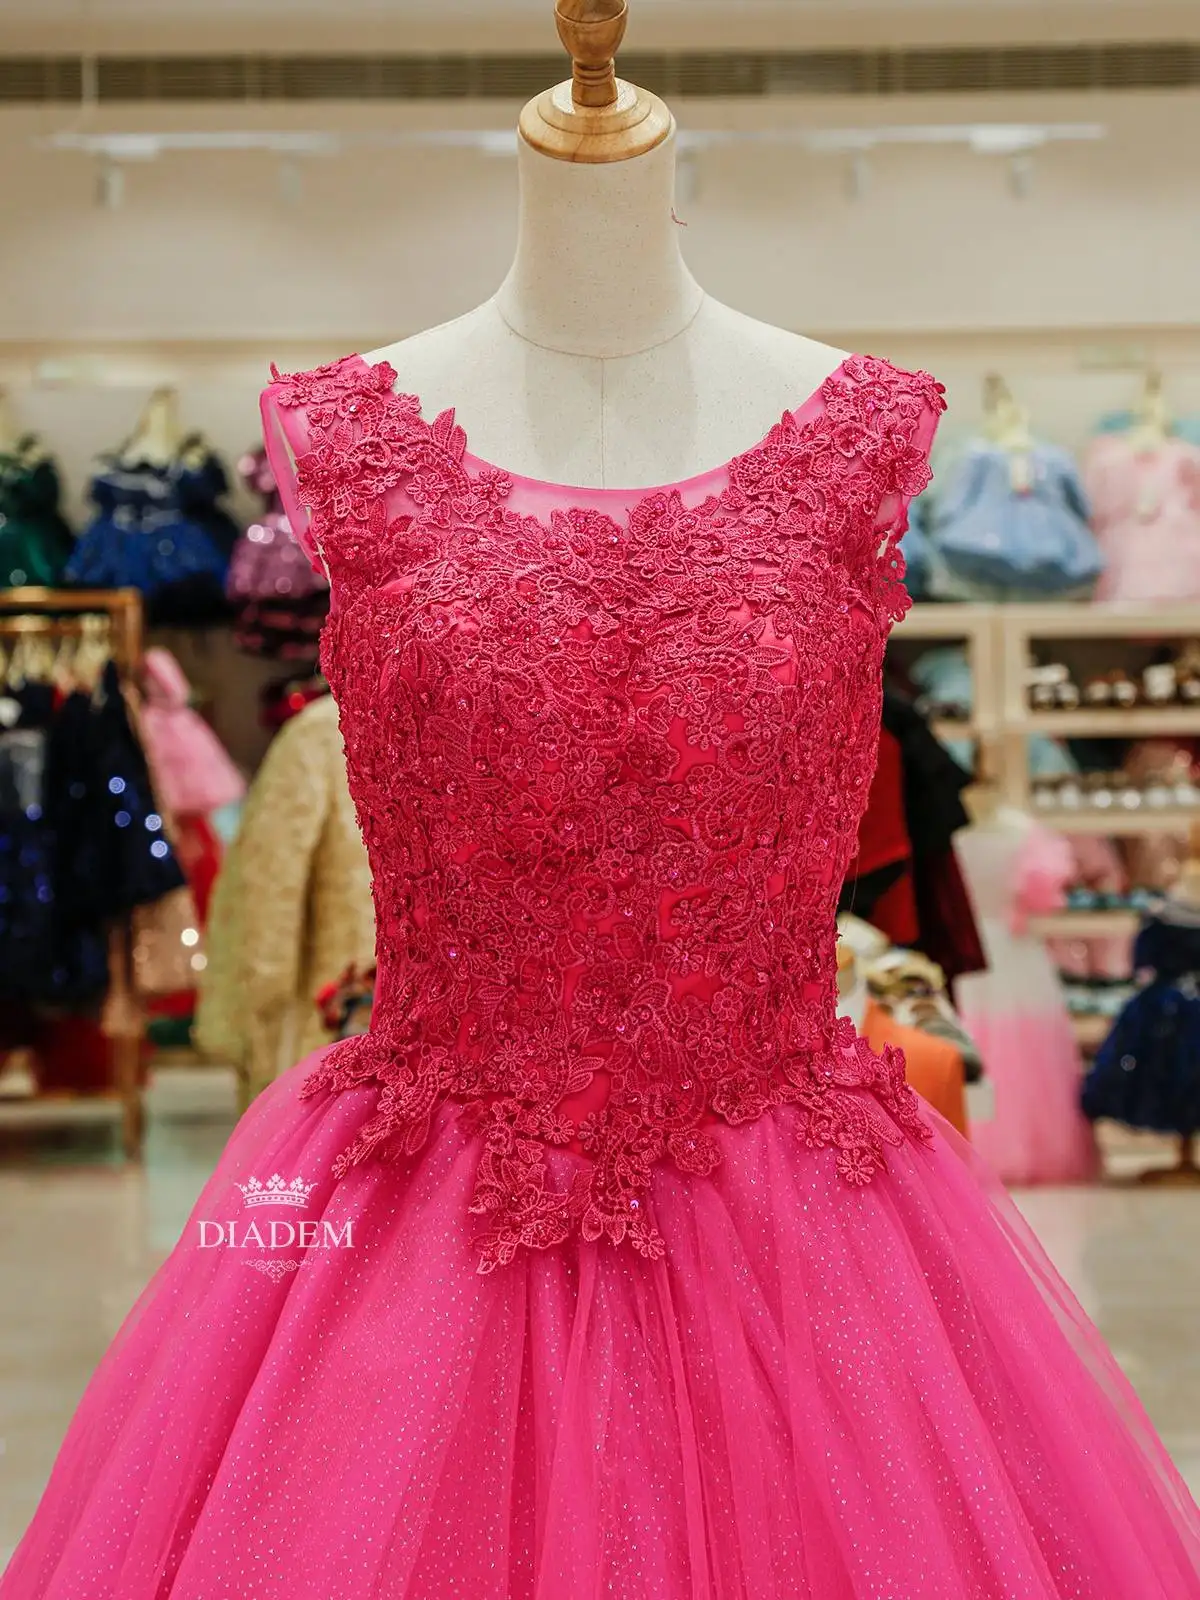 Dark Pink Ball Gown Embellished With Floral Laces And Beads